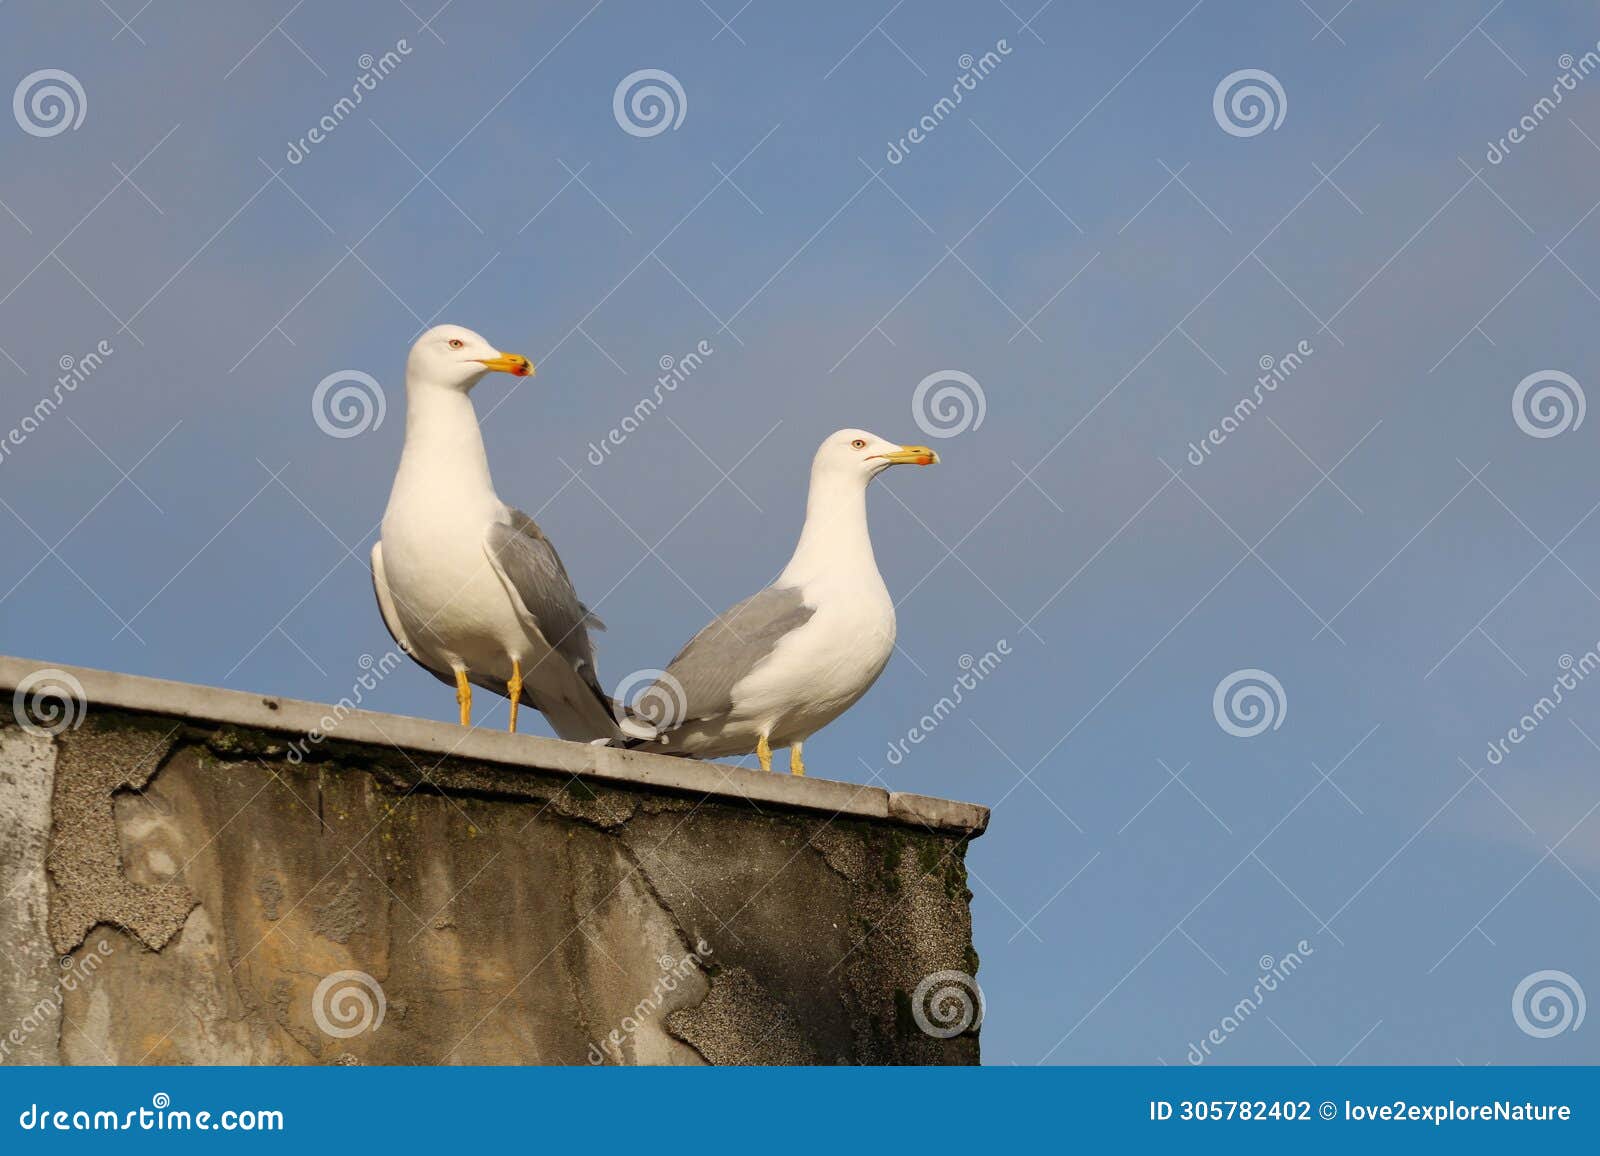 two seagulls on an old chimney against blues sky in kadikoy istanbul